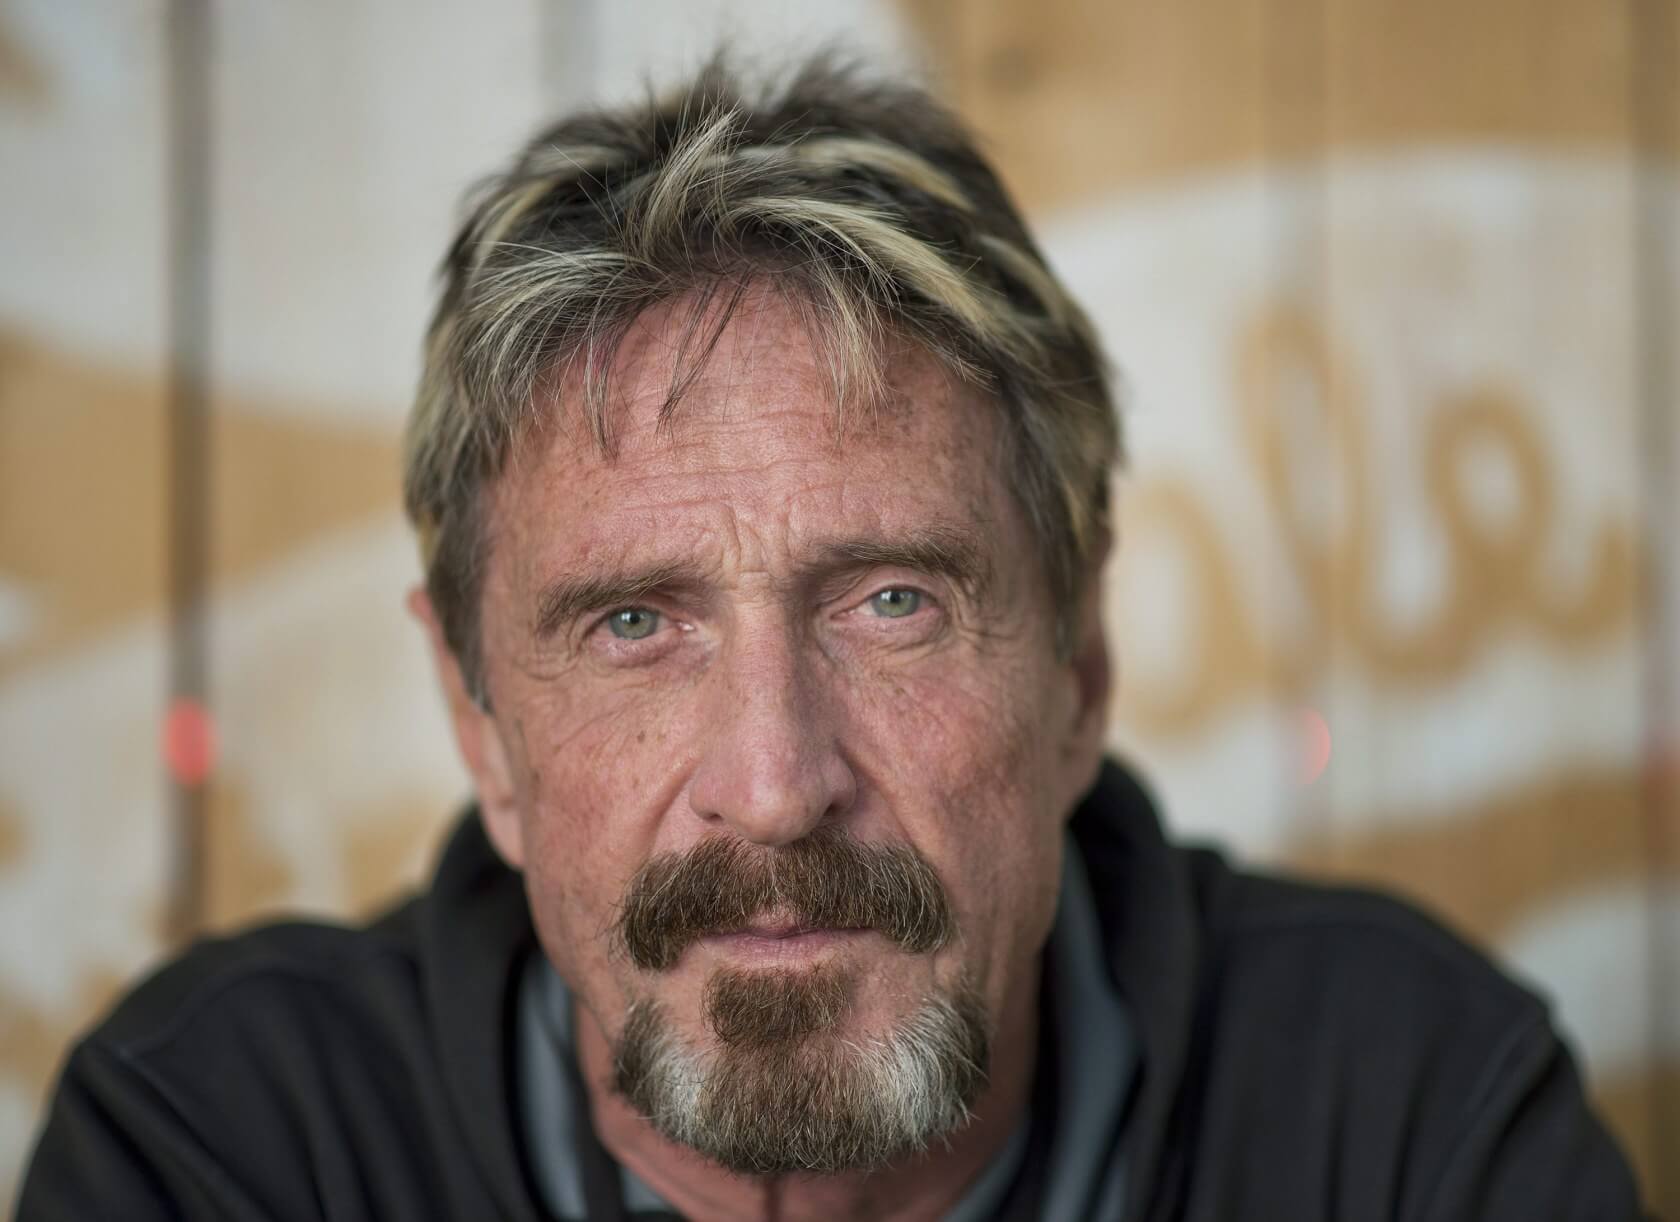 John McAfee arrested in Spain on tax evasion charges, sued by SEC